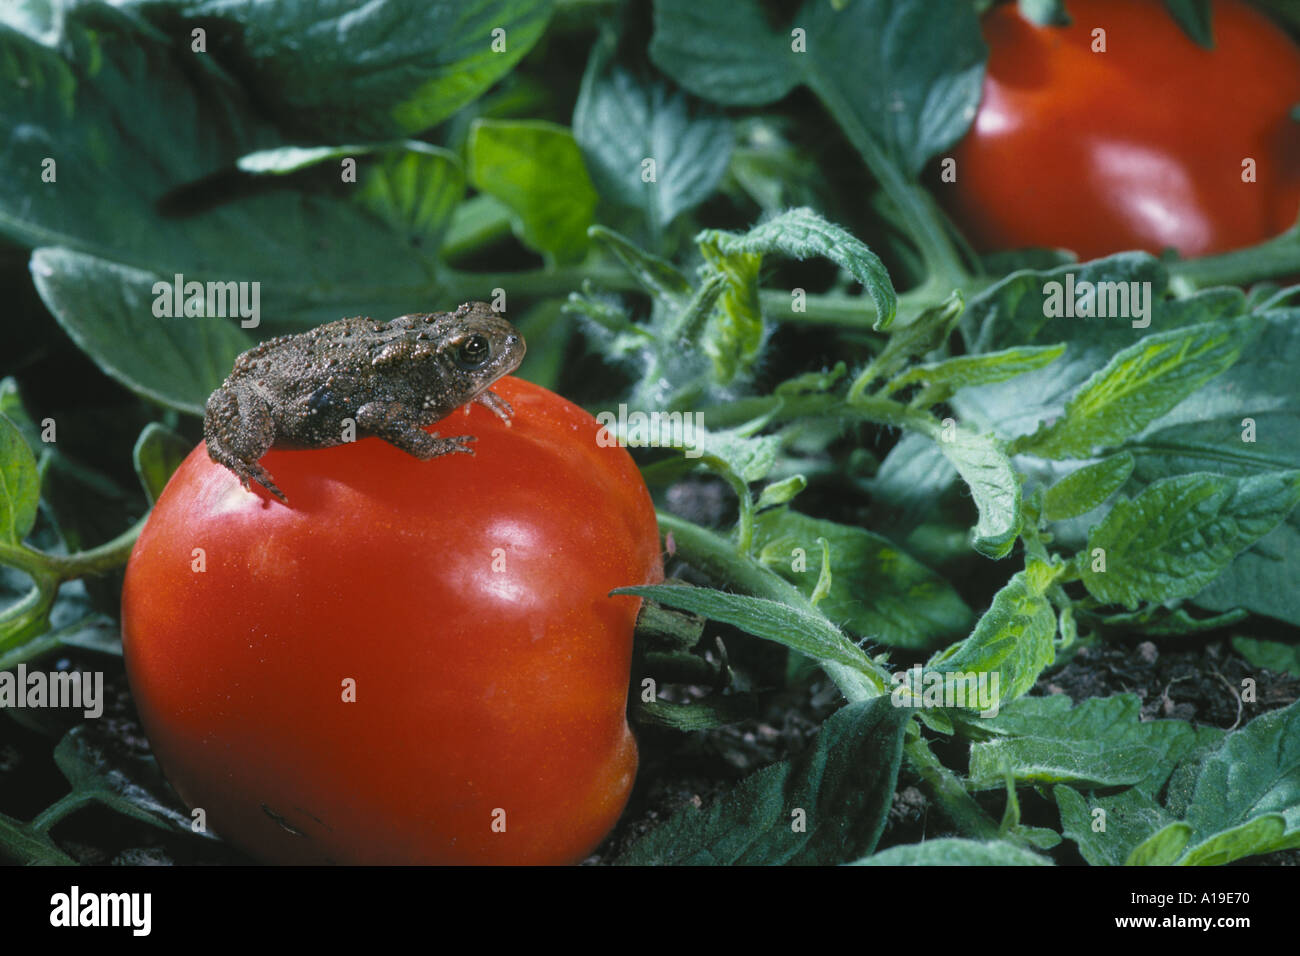 American toad, Bufo americanus, sitting atop a large red Chieftain slicing tomato in a vegetable garden, Missouri USA Stock Photo